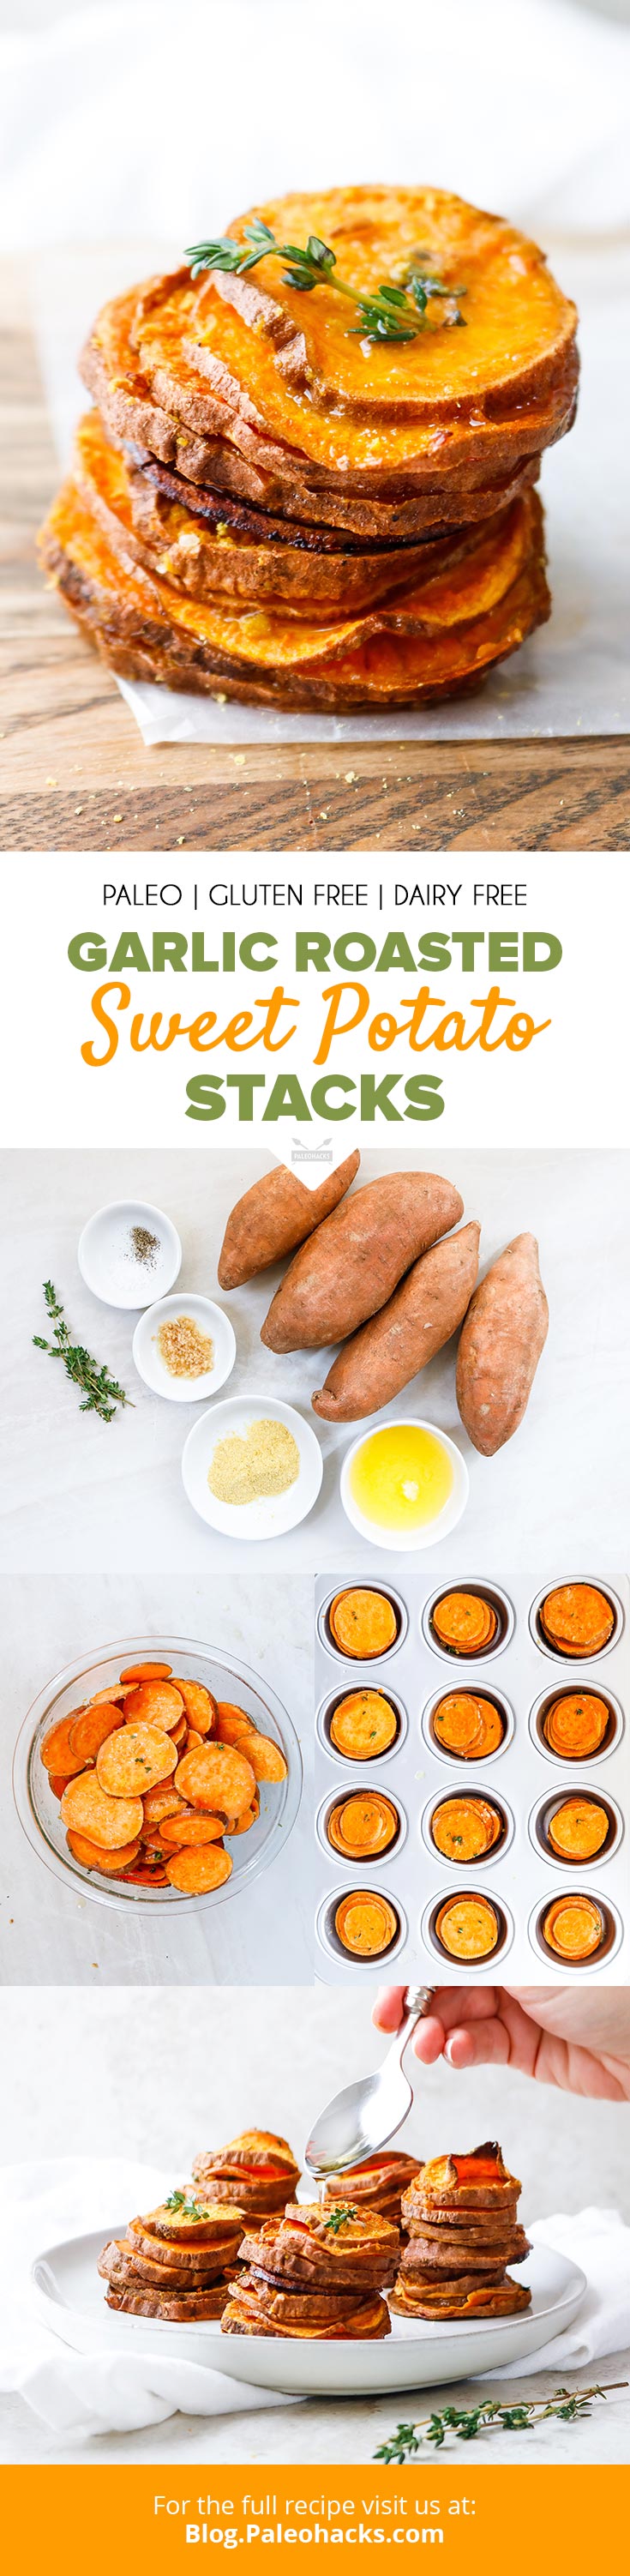 Stack sliced sweet potatoes in muffin tins for a garlicky, cheesy snack filled with healthy antioxidants and fiber.